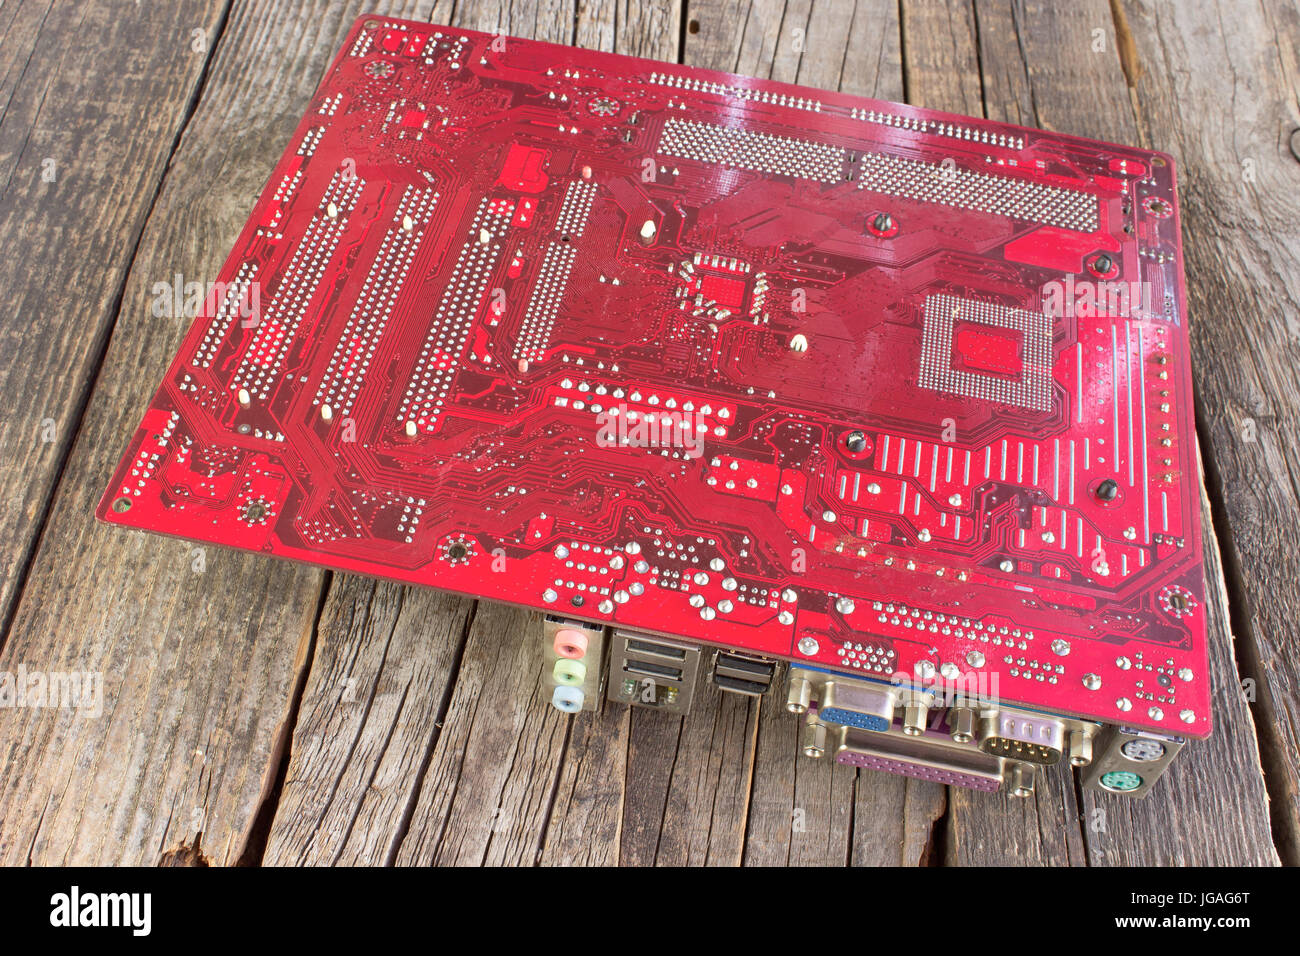 Hardware motherboard component on wooden background Stock Photo